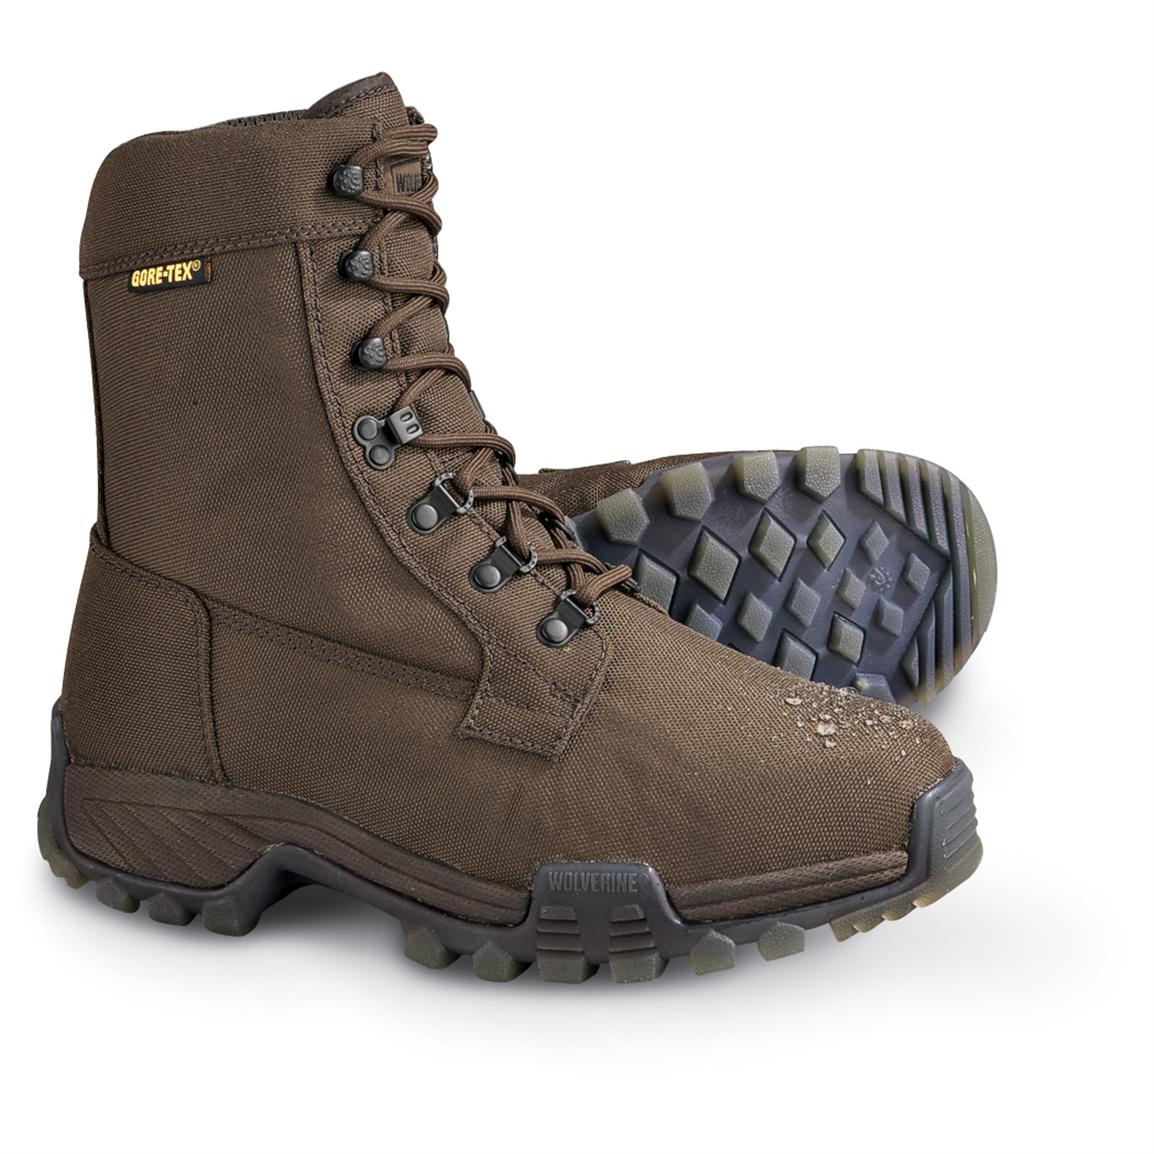 wolverine king caribou boots